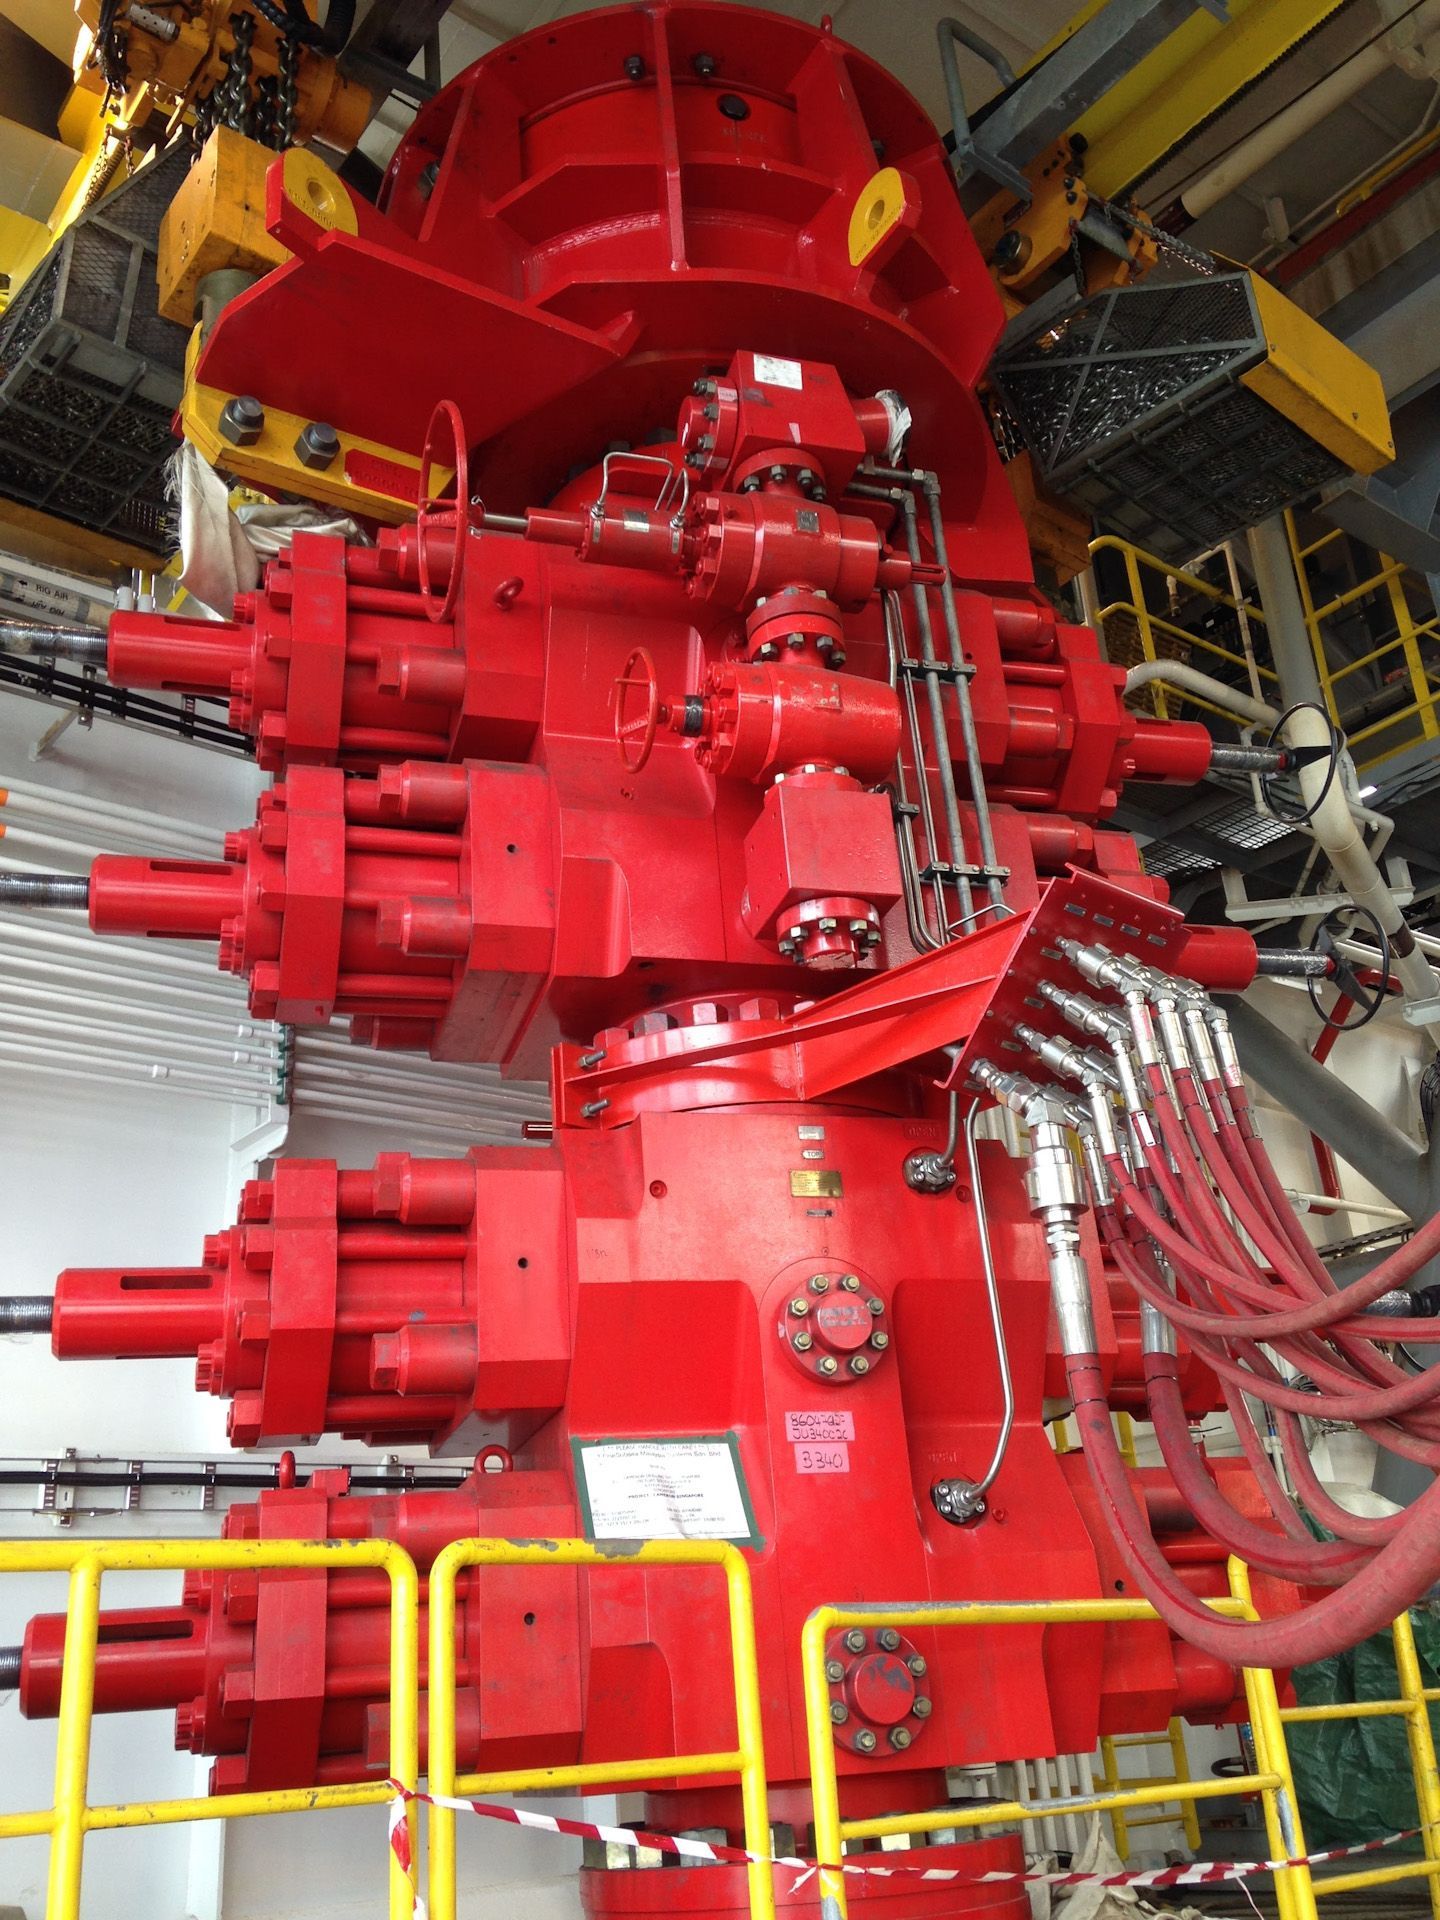 A large red blowout machine with  fence around it